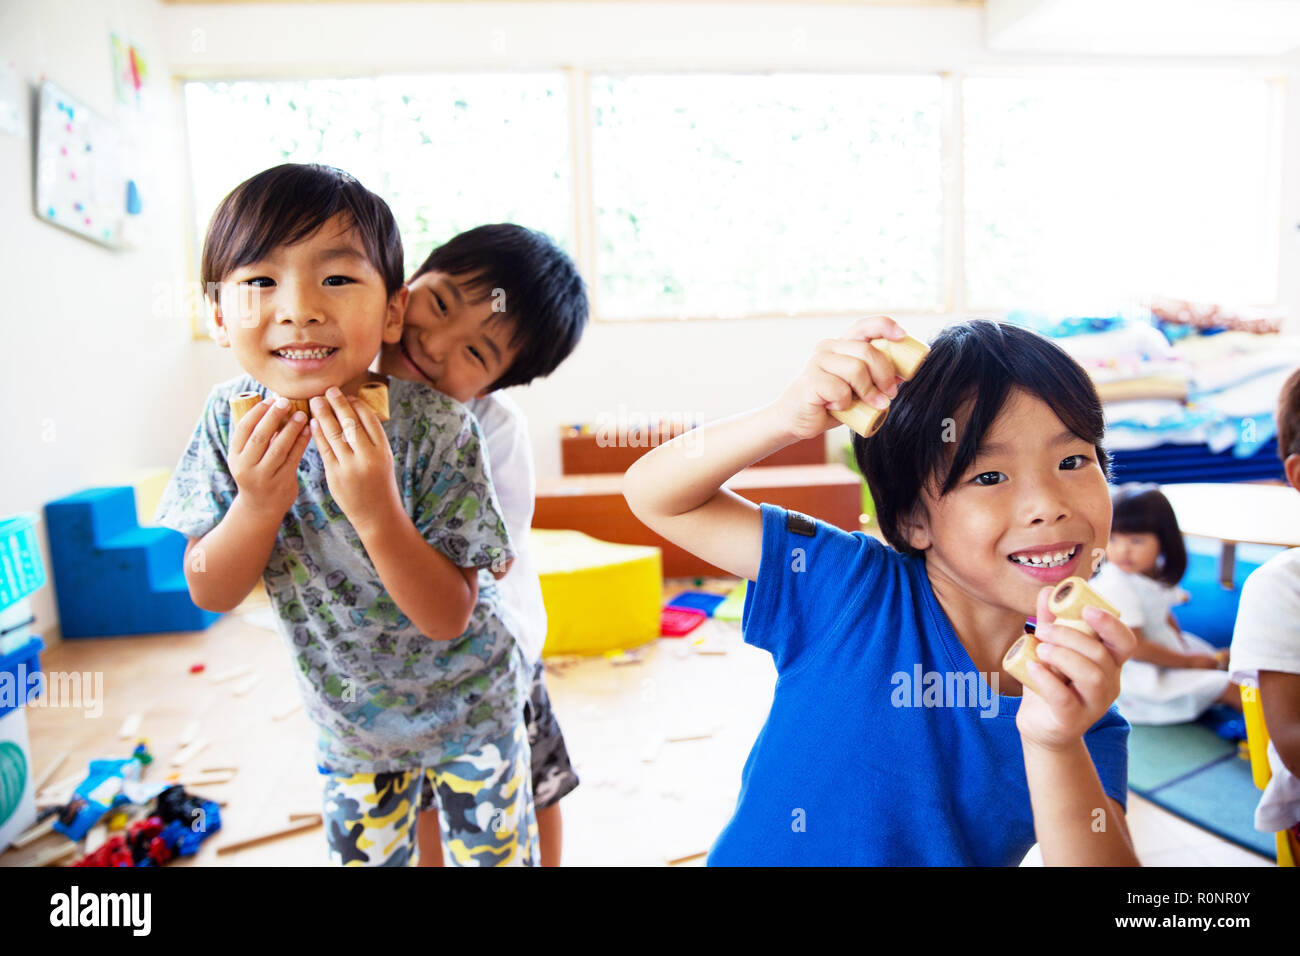 Three young children in a Japanese preschool, looking at camera and pulling faces,smiling. Stock Photo